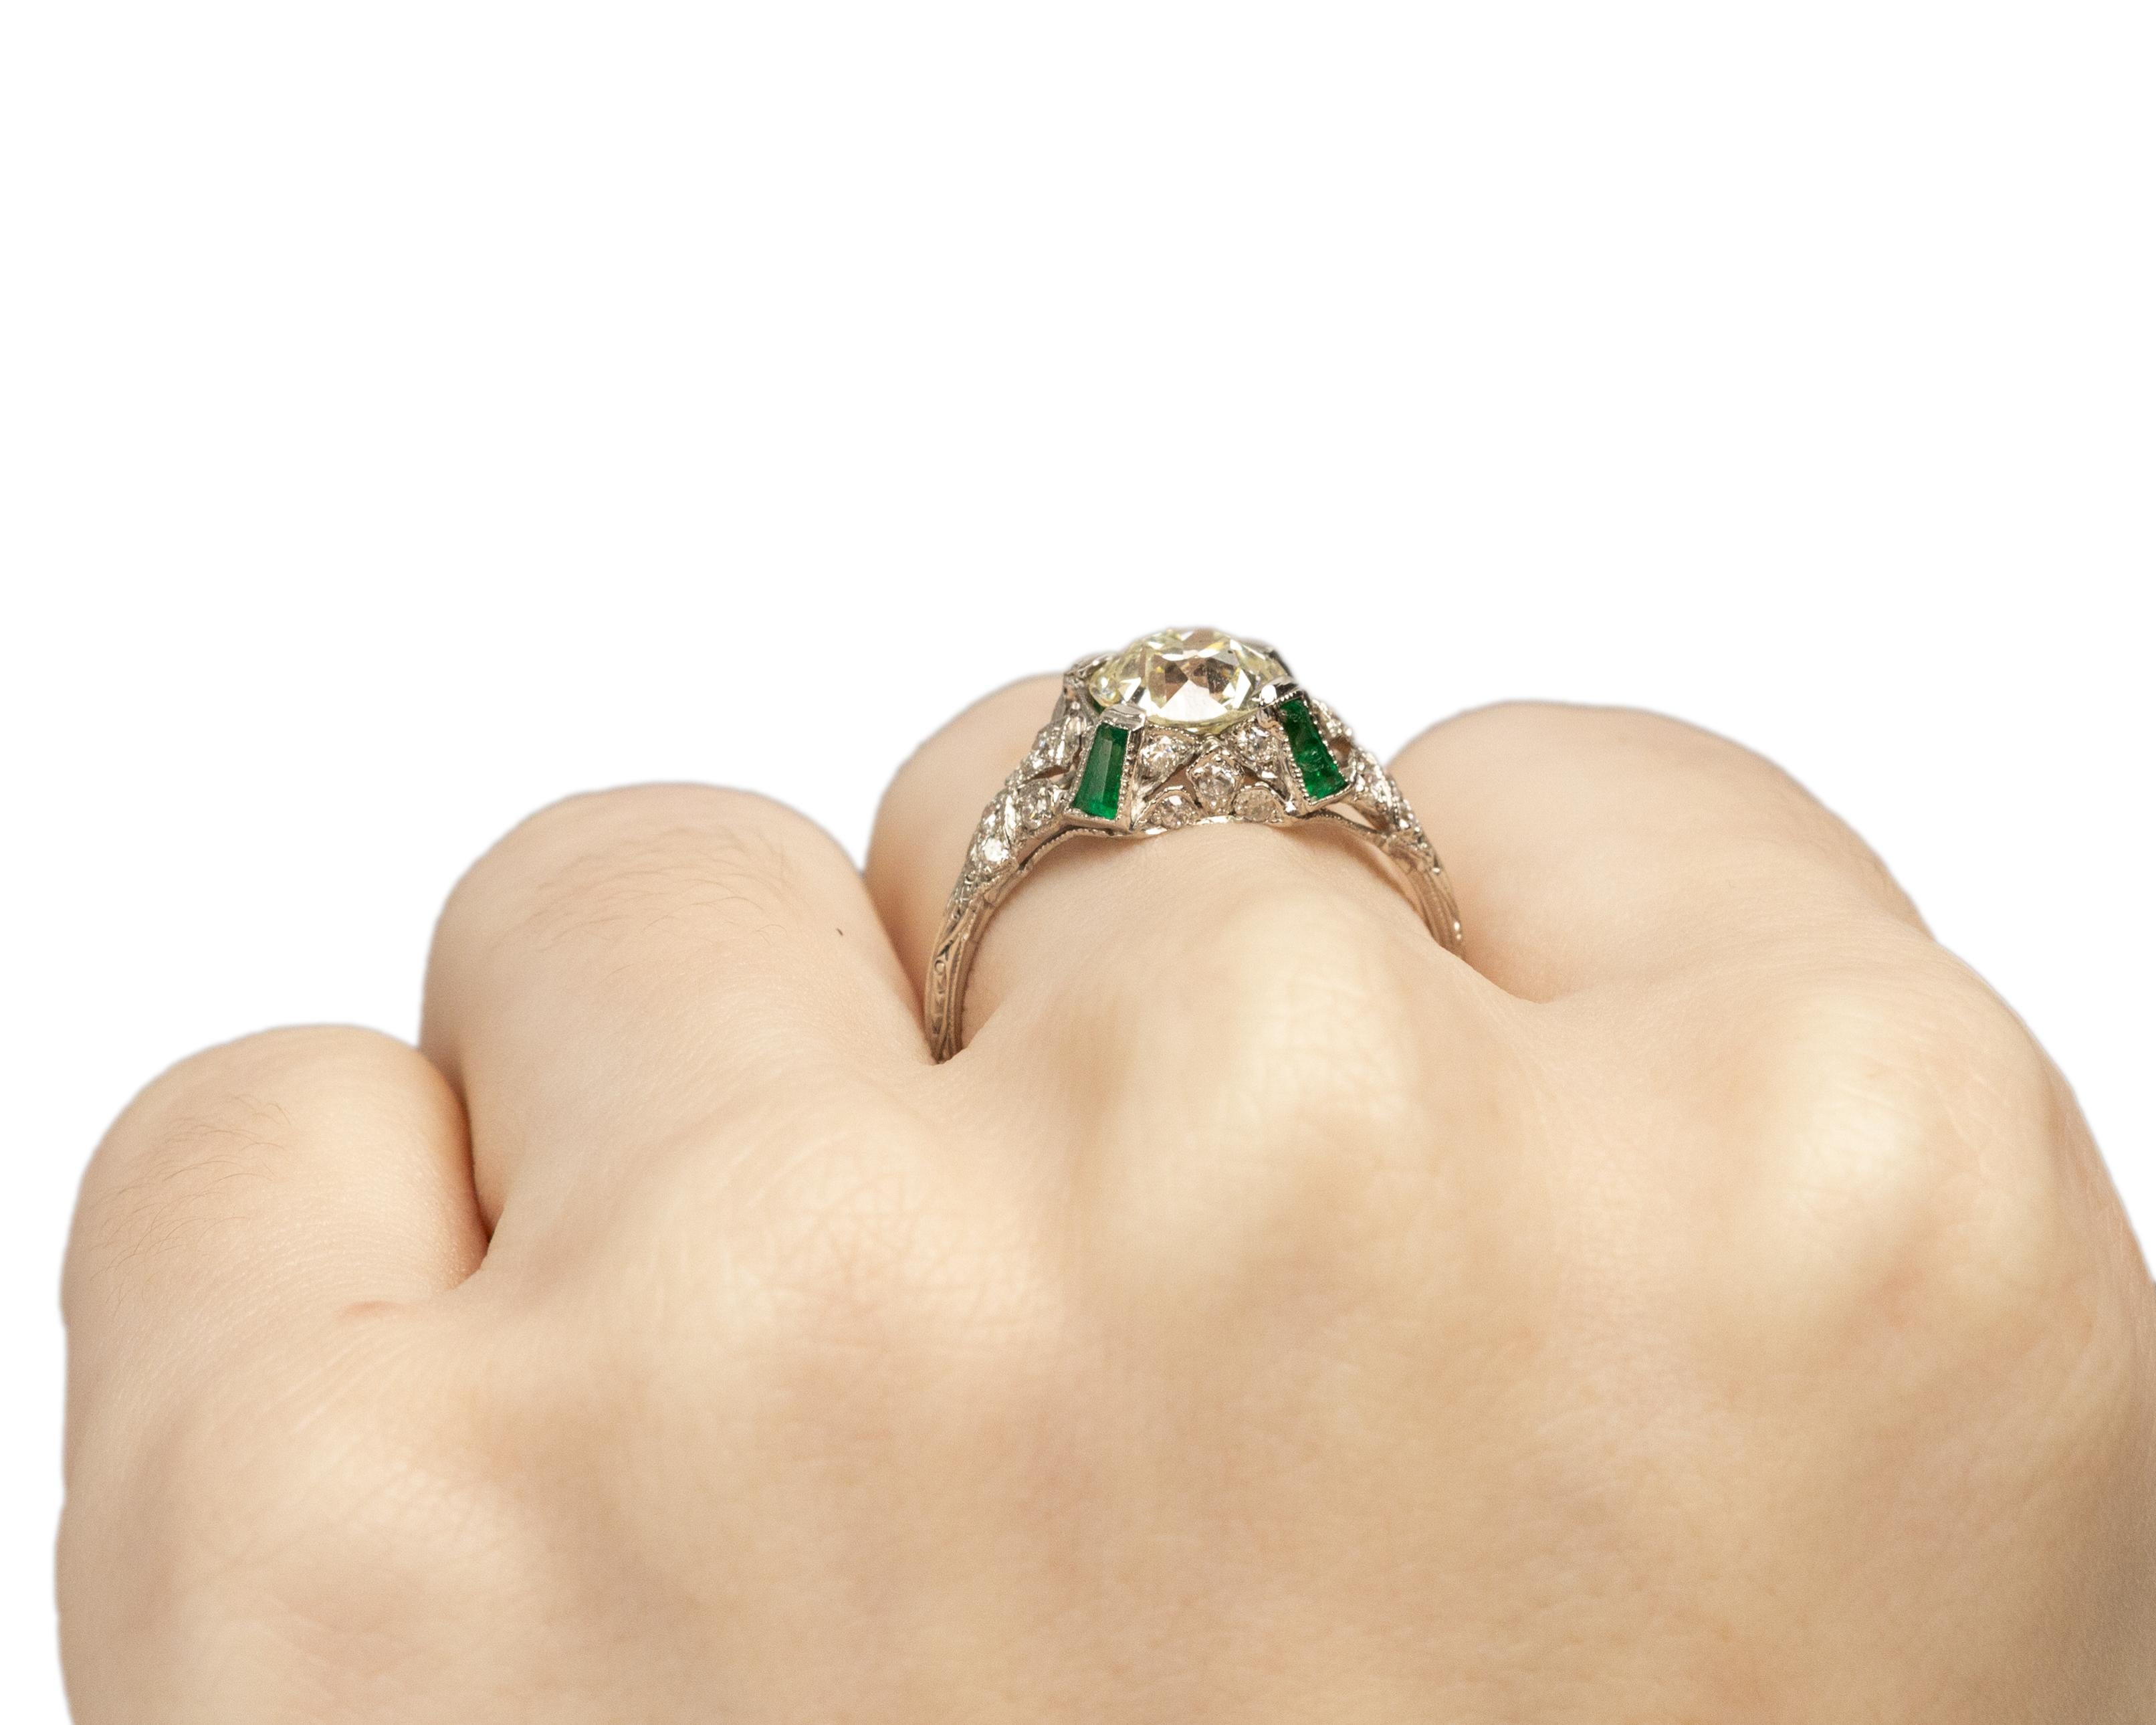 Women's Platinum GIA 1.51 Carat Diamond Brilliant Engagement Ring with Emerald Accents For Sale